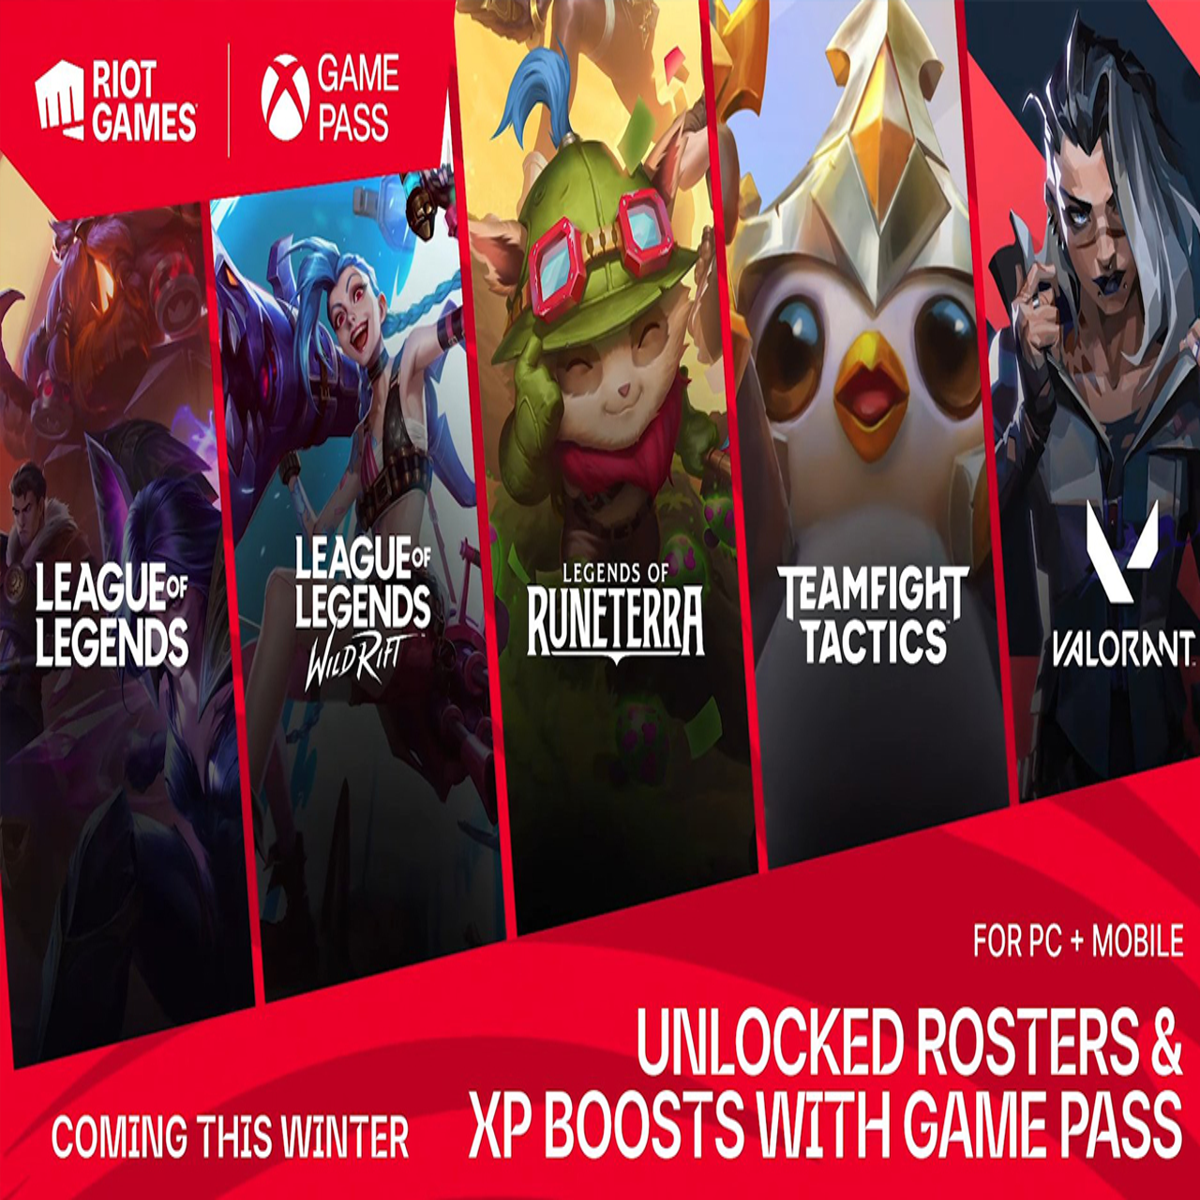 Valorant joins Game Pass next week with all agents unlocked